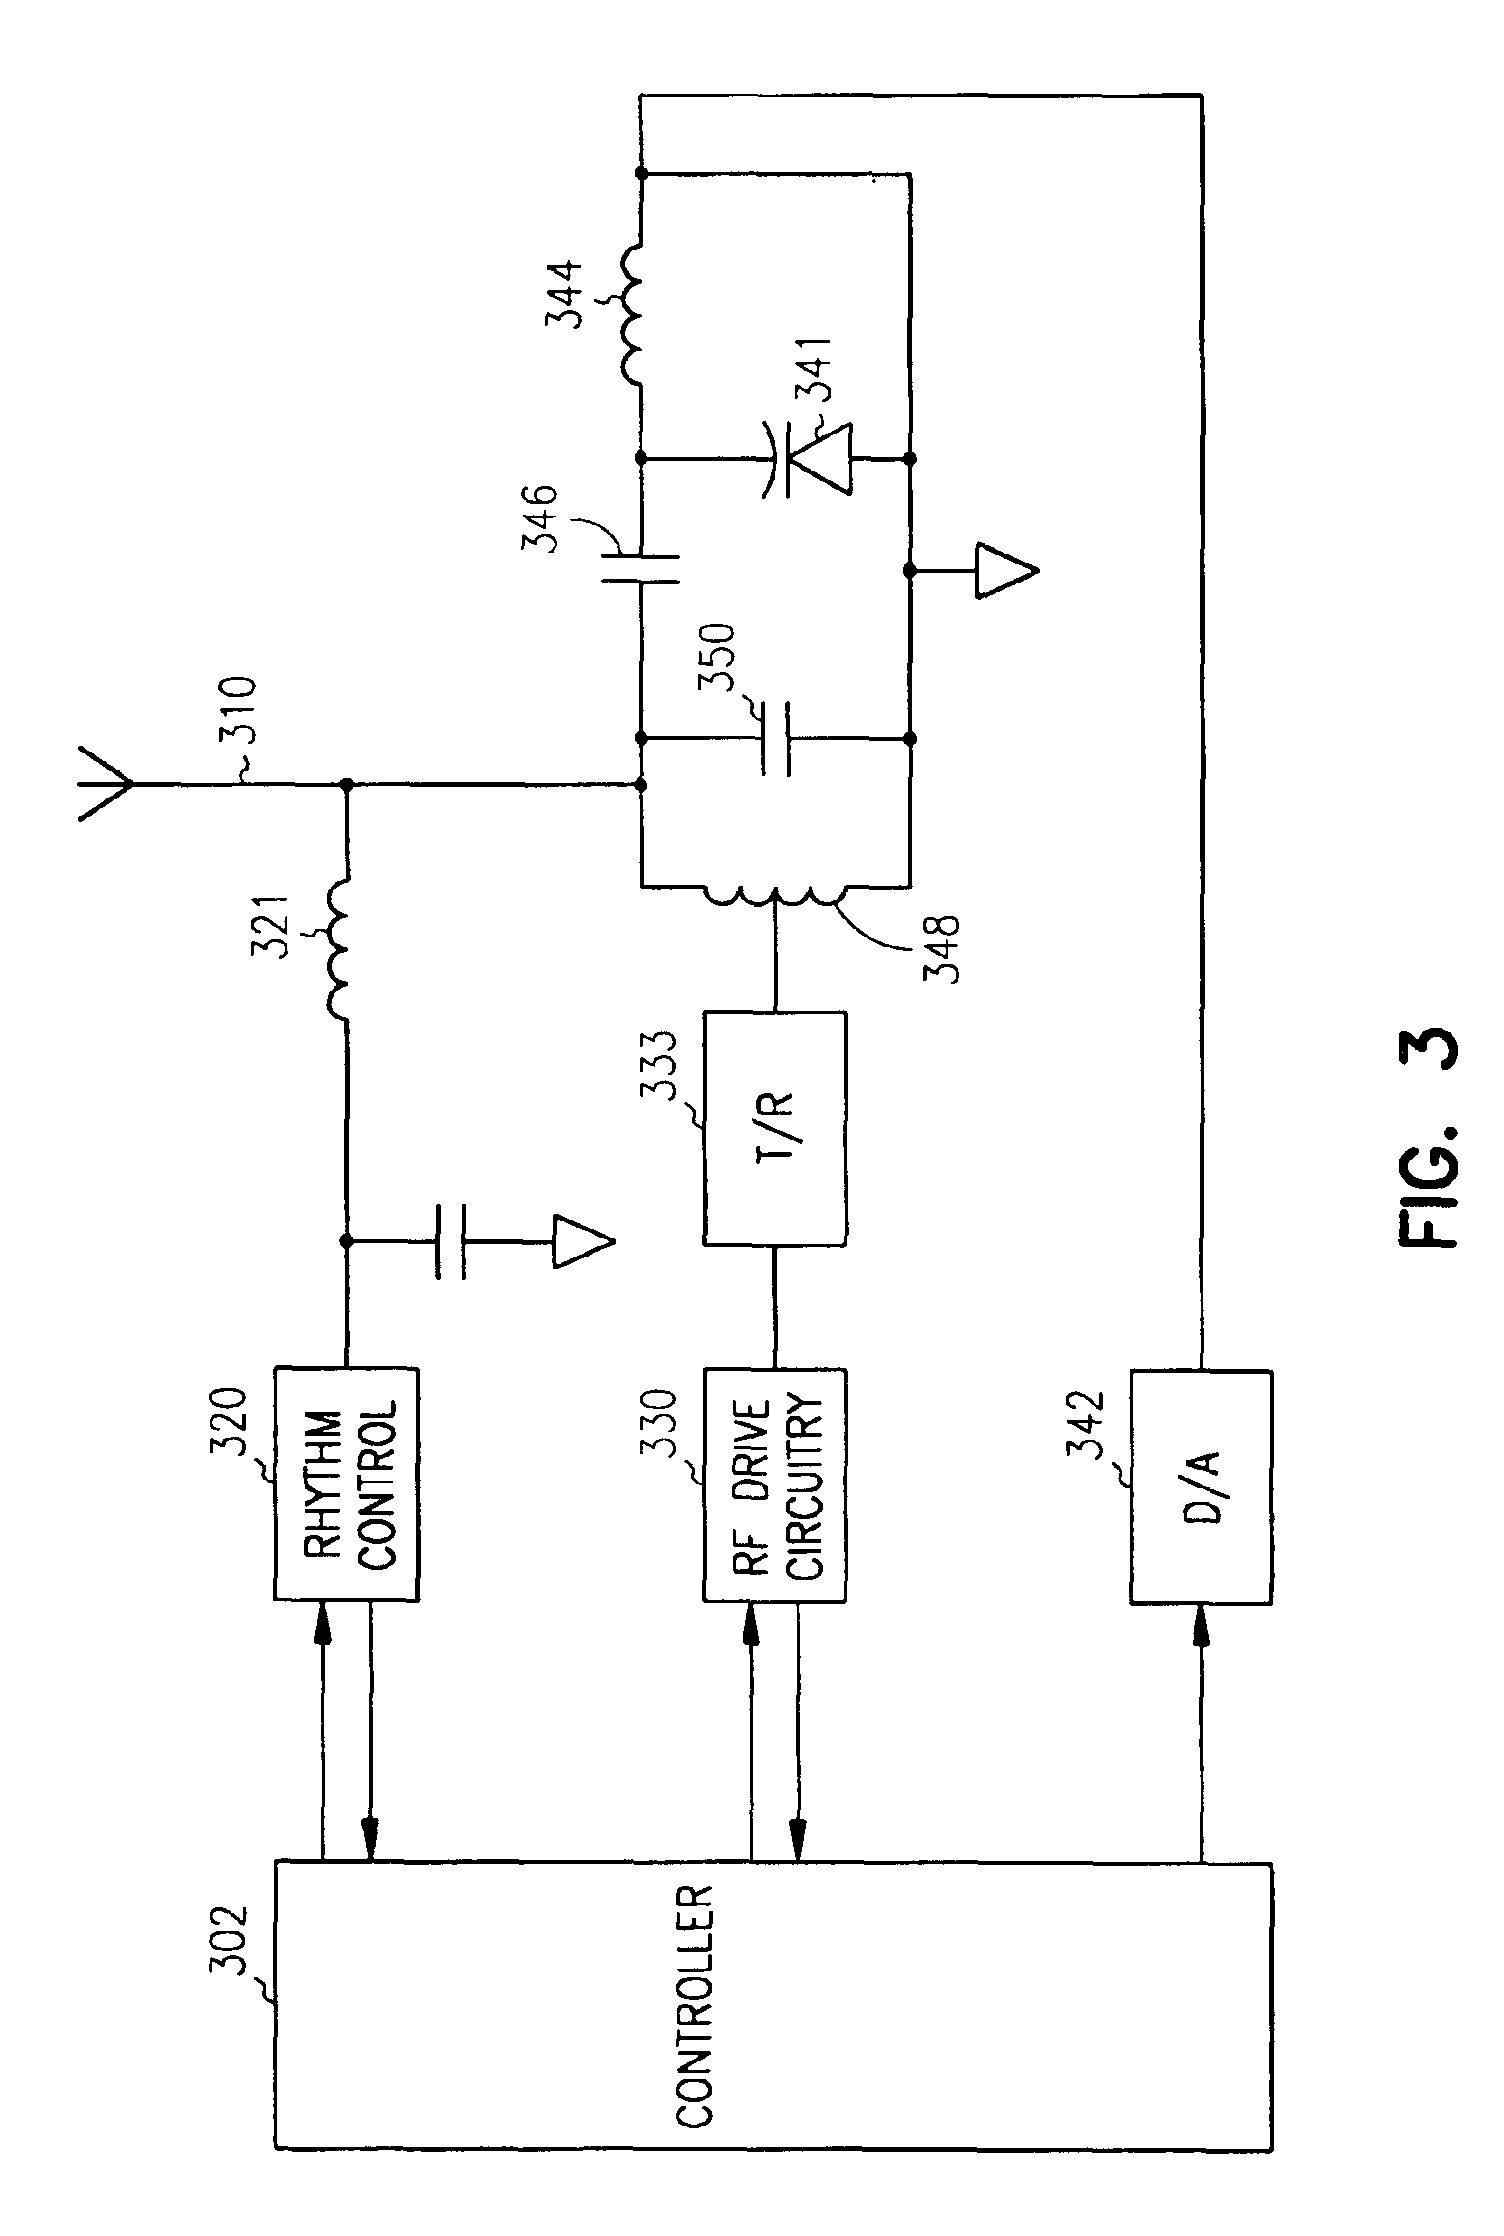 Telemetry apparatus and method for an implantable medical device